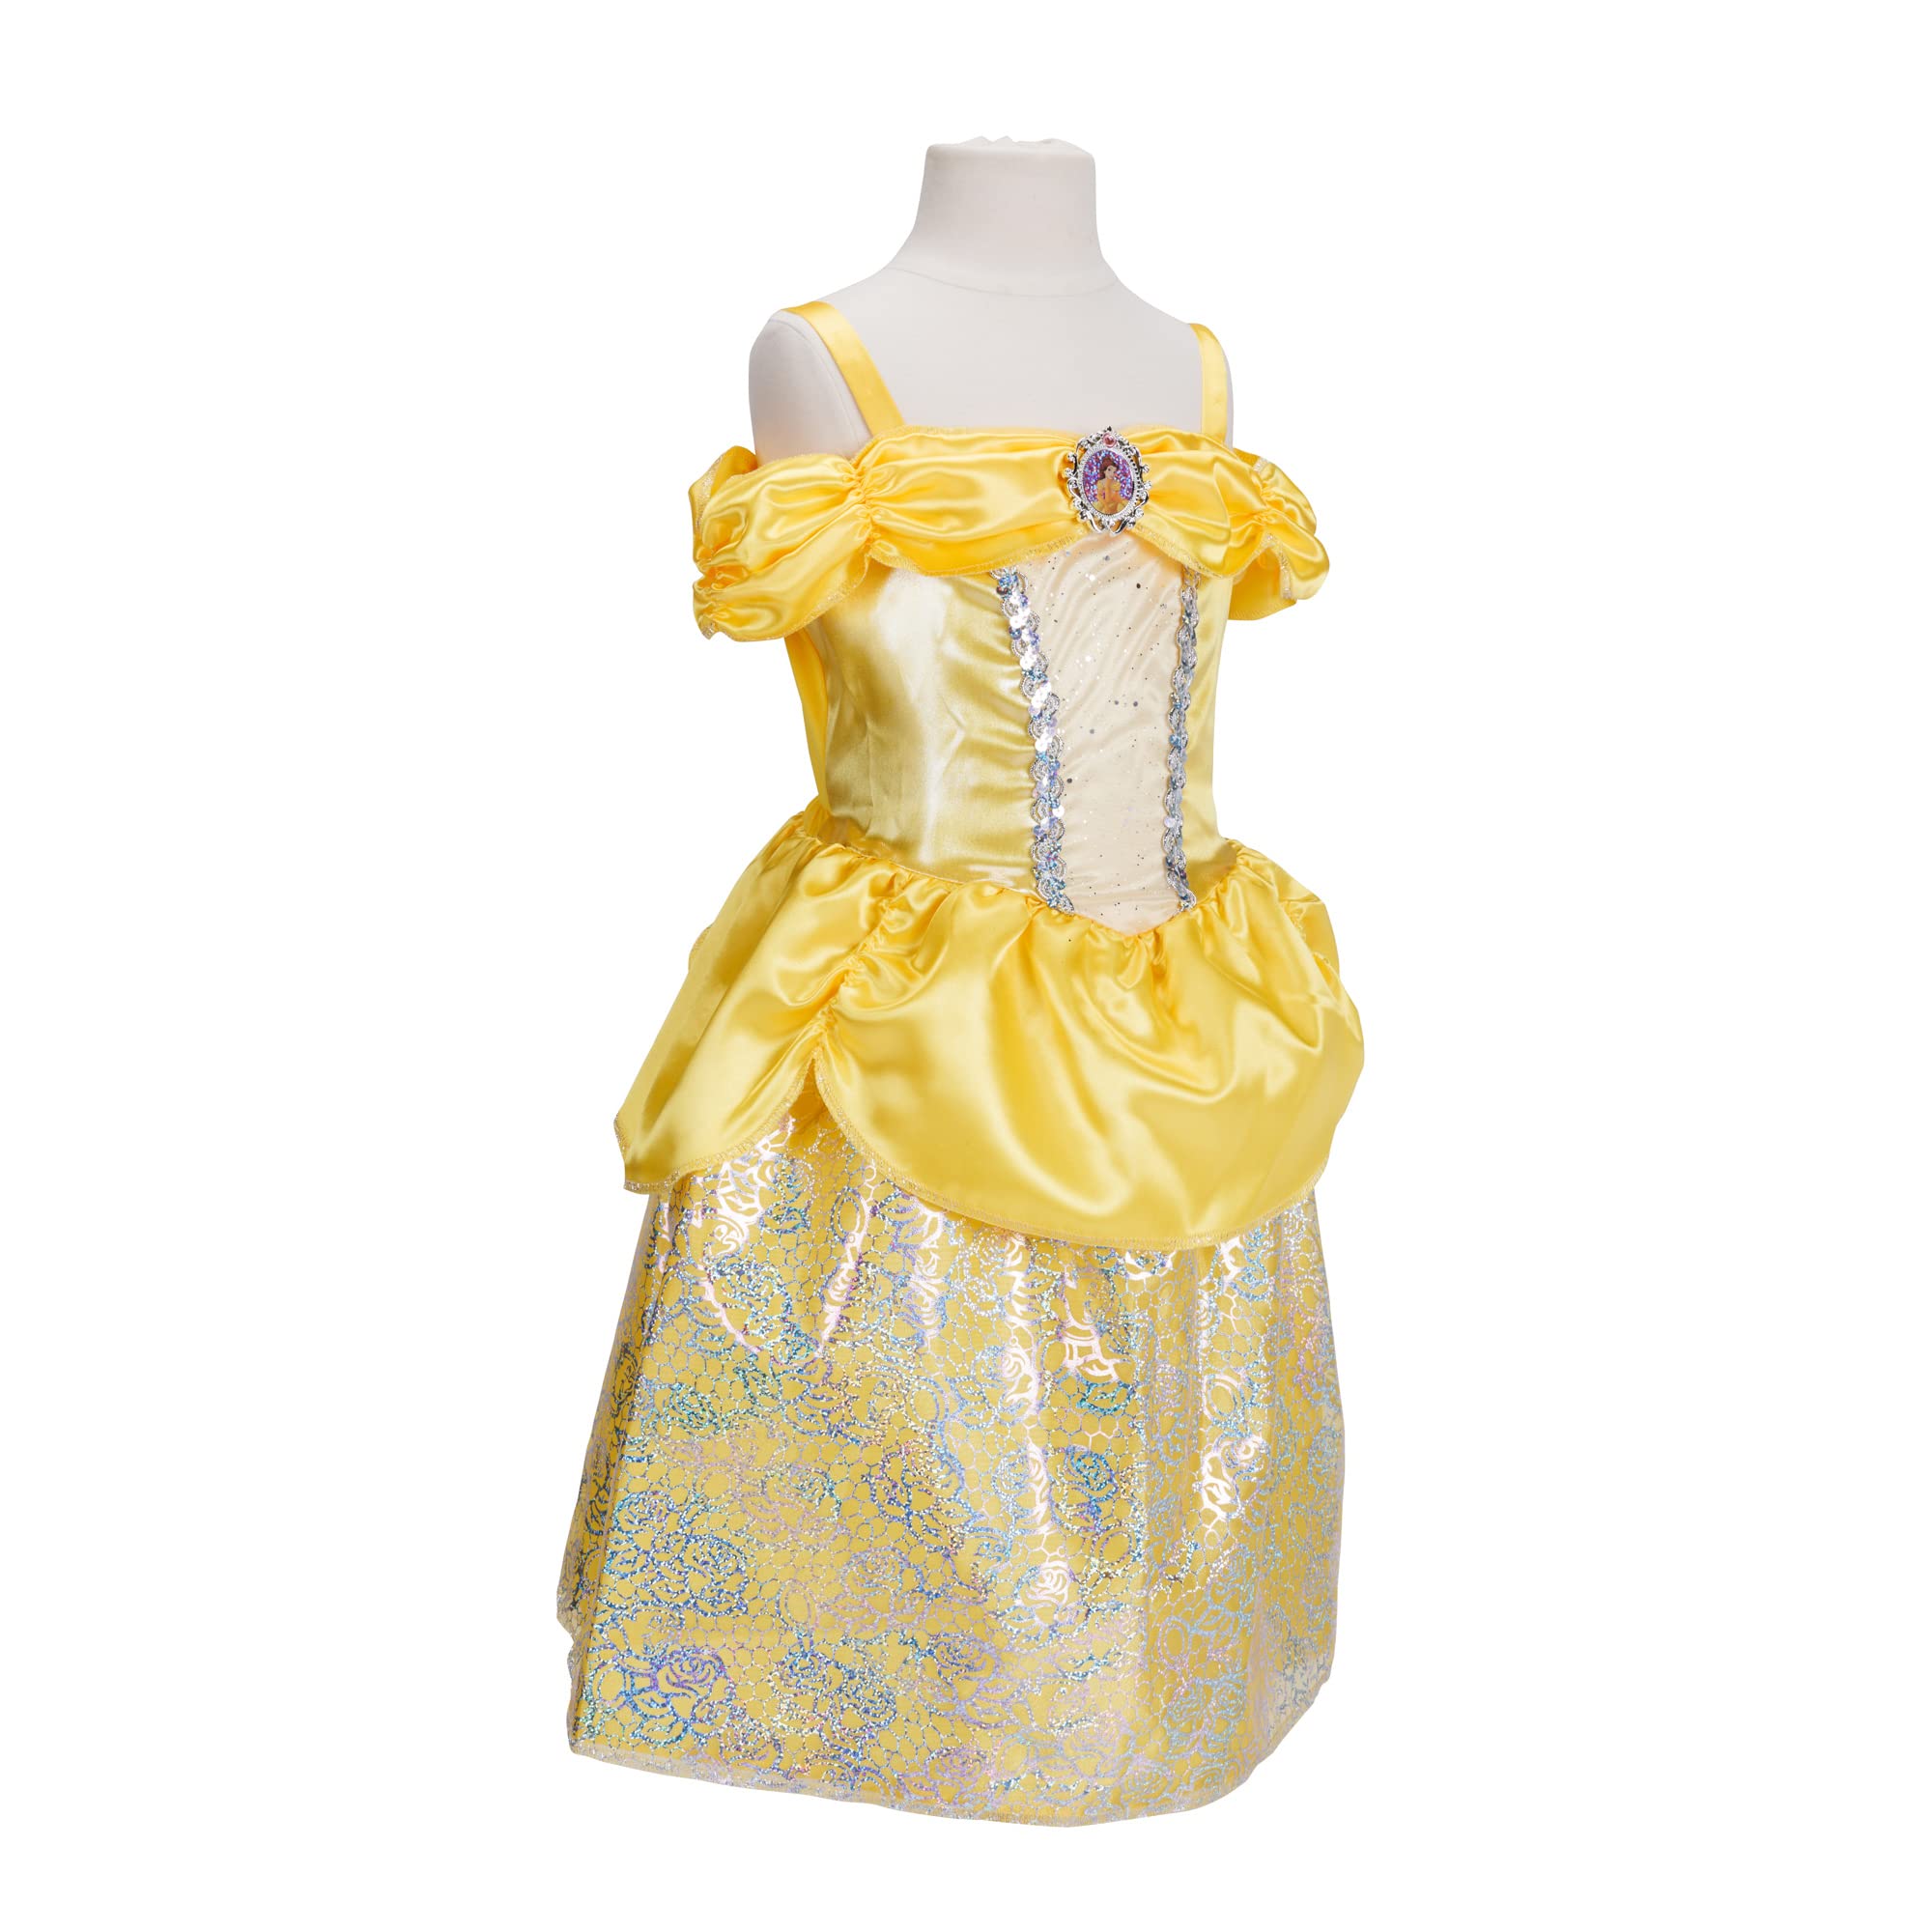 Disney Princess Disney 100 Belle Dress Costume for Girls, Perfect for Party, Halloween Or Pretend Play Dress Up Child Size 4-6X